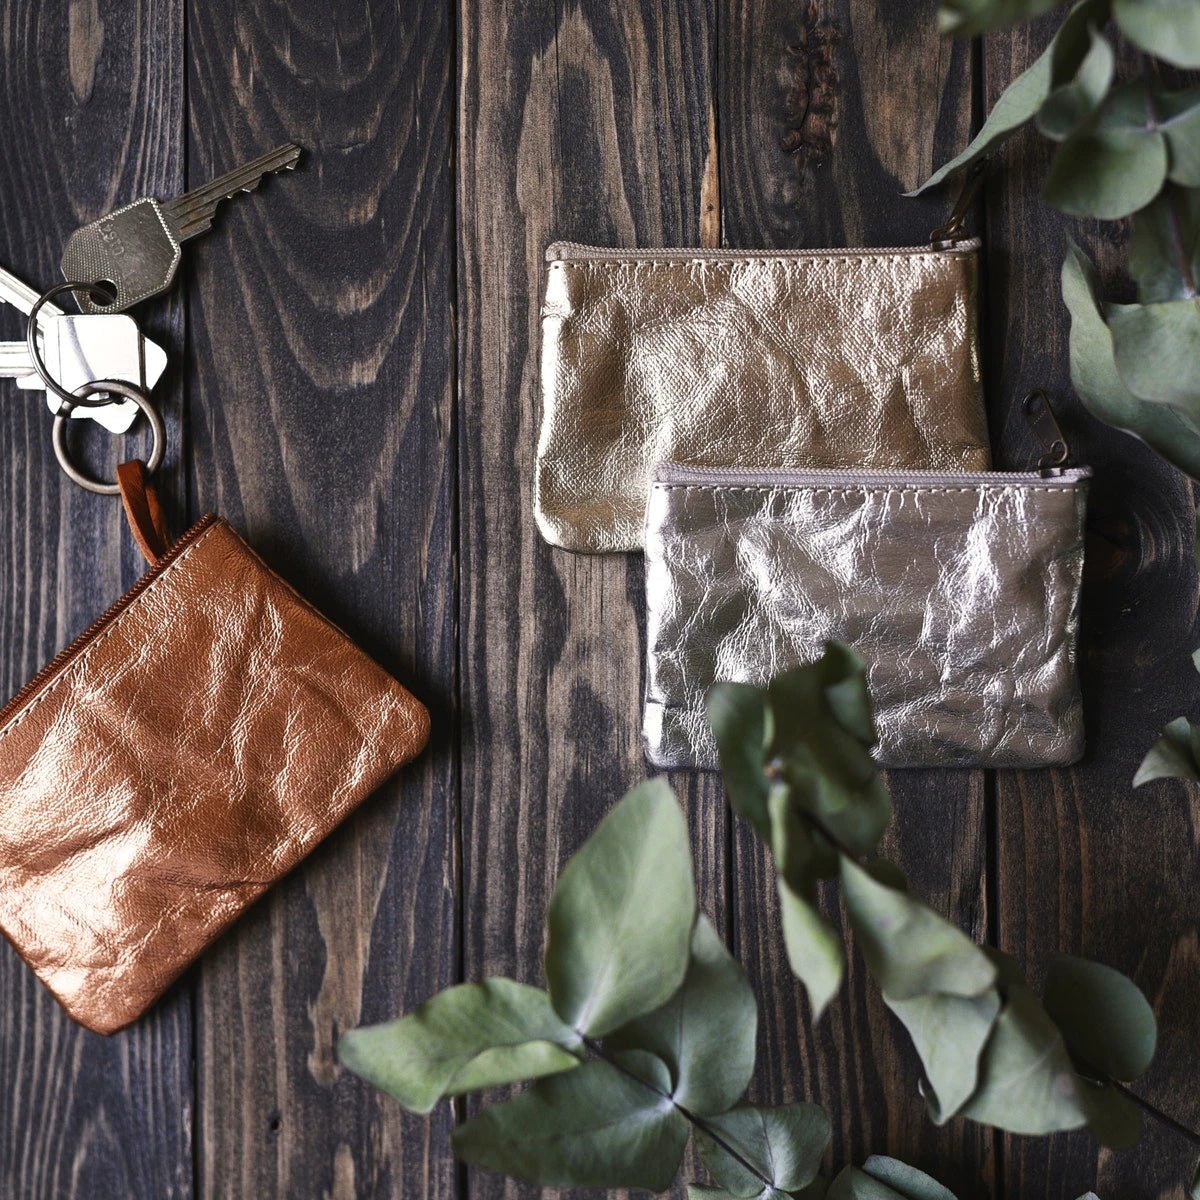 Three washable paper small pouches sit on a wooden table top. The one at left shows three keys attached to its inner keyring. They are from left to right metallic rose gold, metallic gold, and metallic silver.